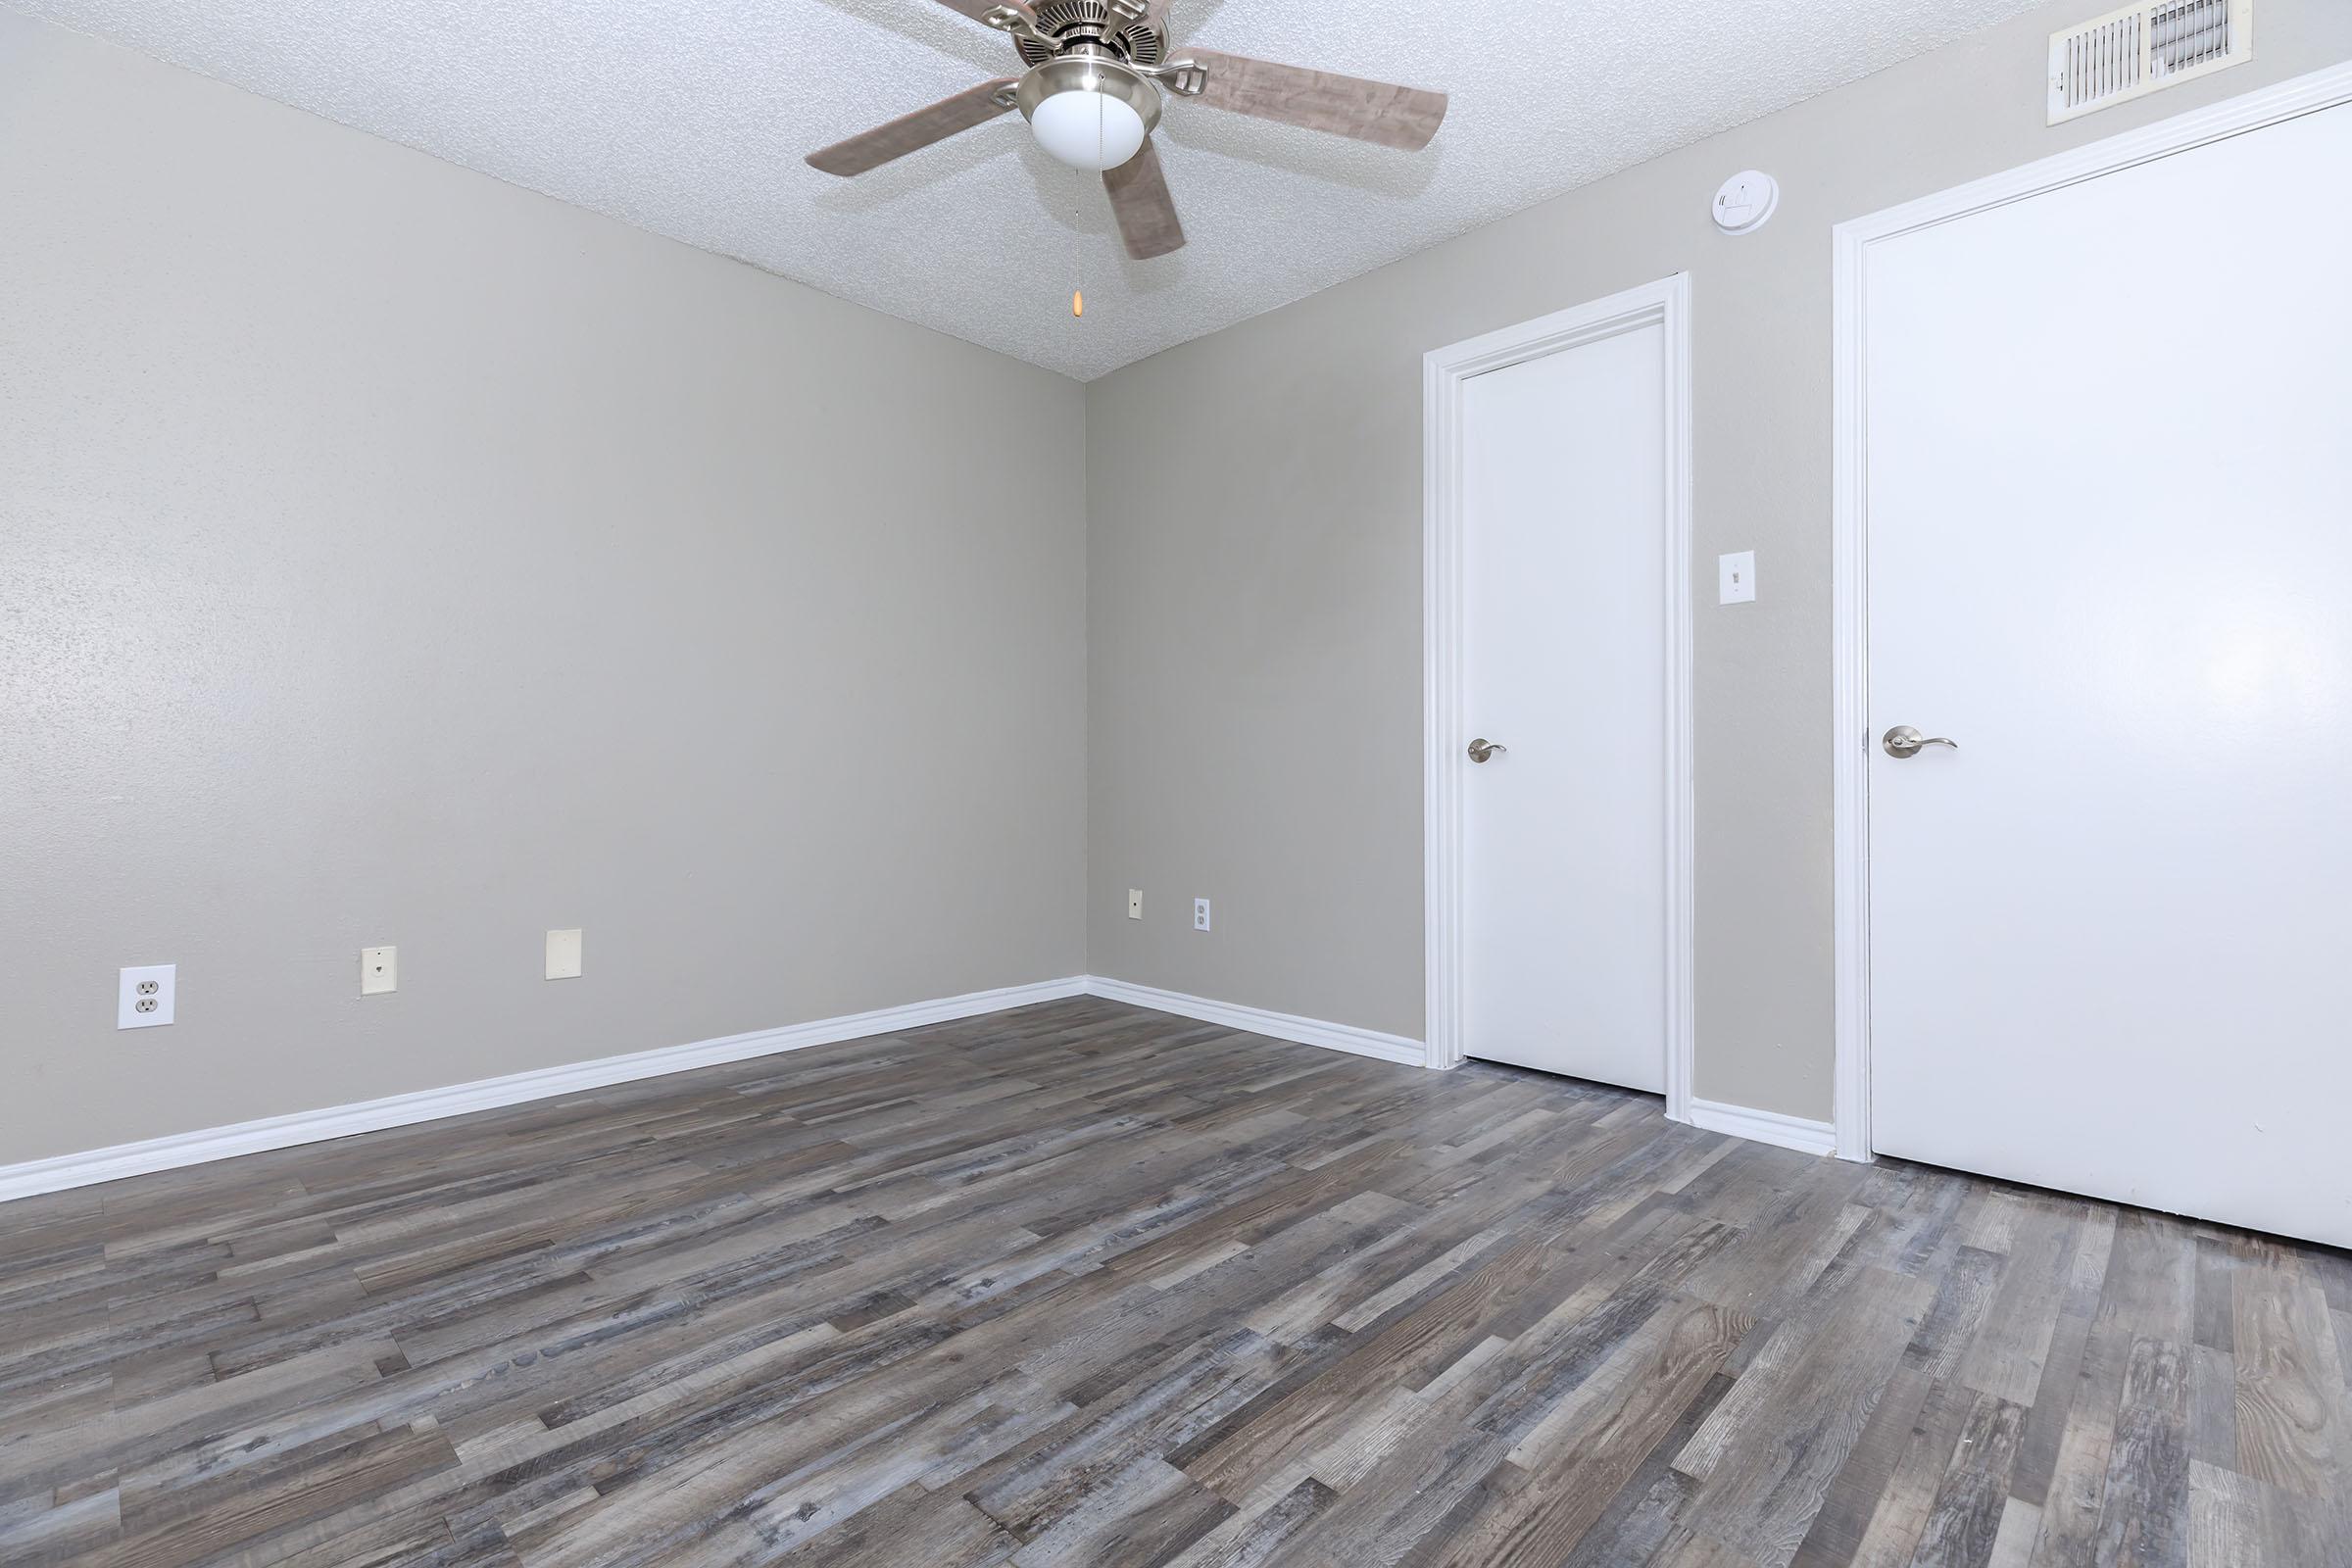 TWO BEDROOM APARTMENT FOR RENT IN LANCASTER, TEXAS